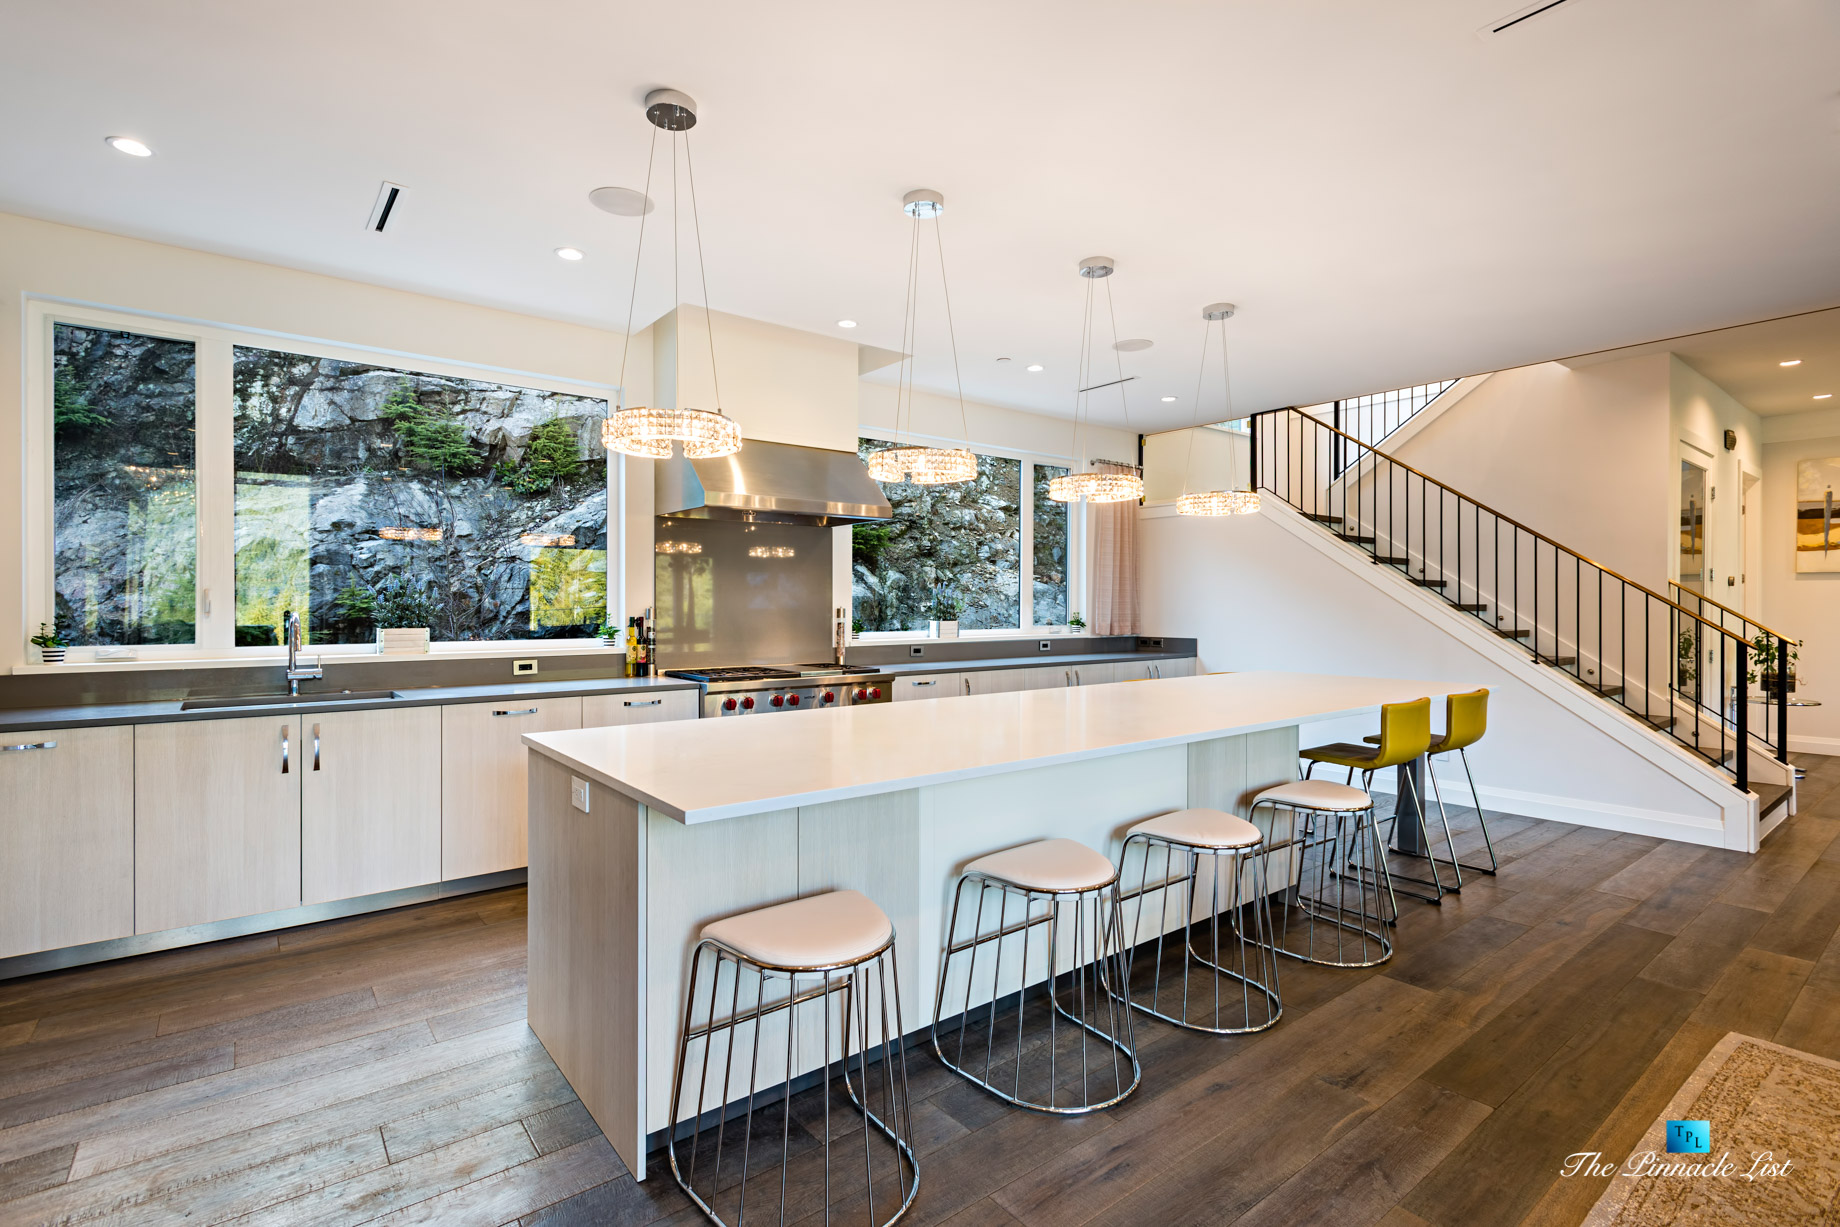 1083 Uplands Dr, Anmore, BC, Canada - Kitchen and Island - Luxury Real Estate - Greater Vancouver West Coast Modern Home